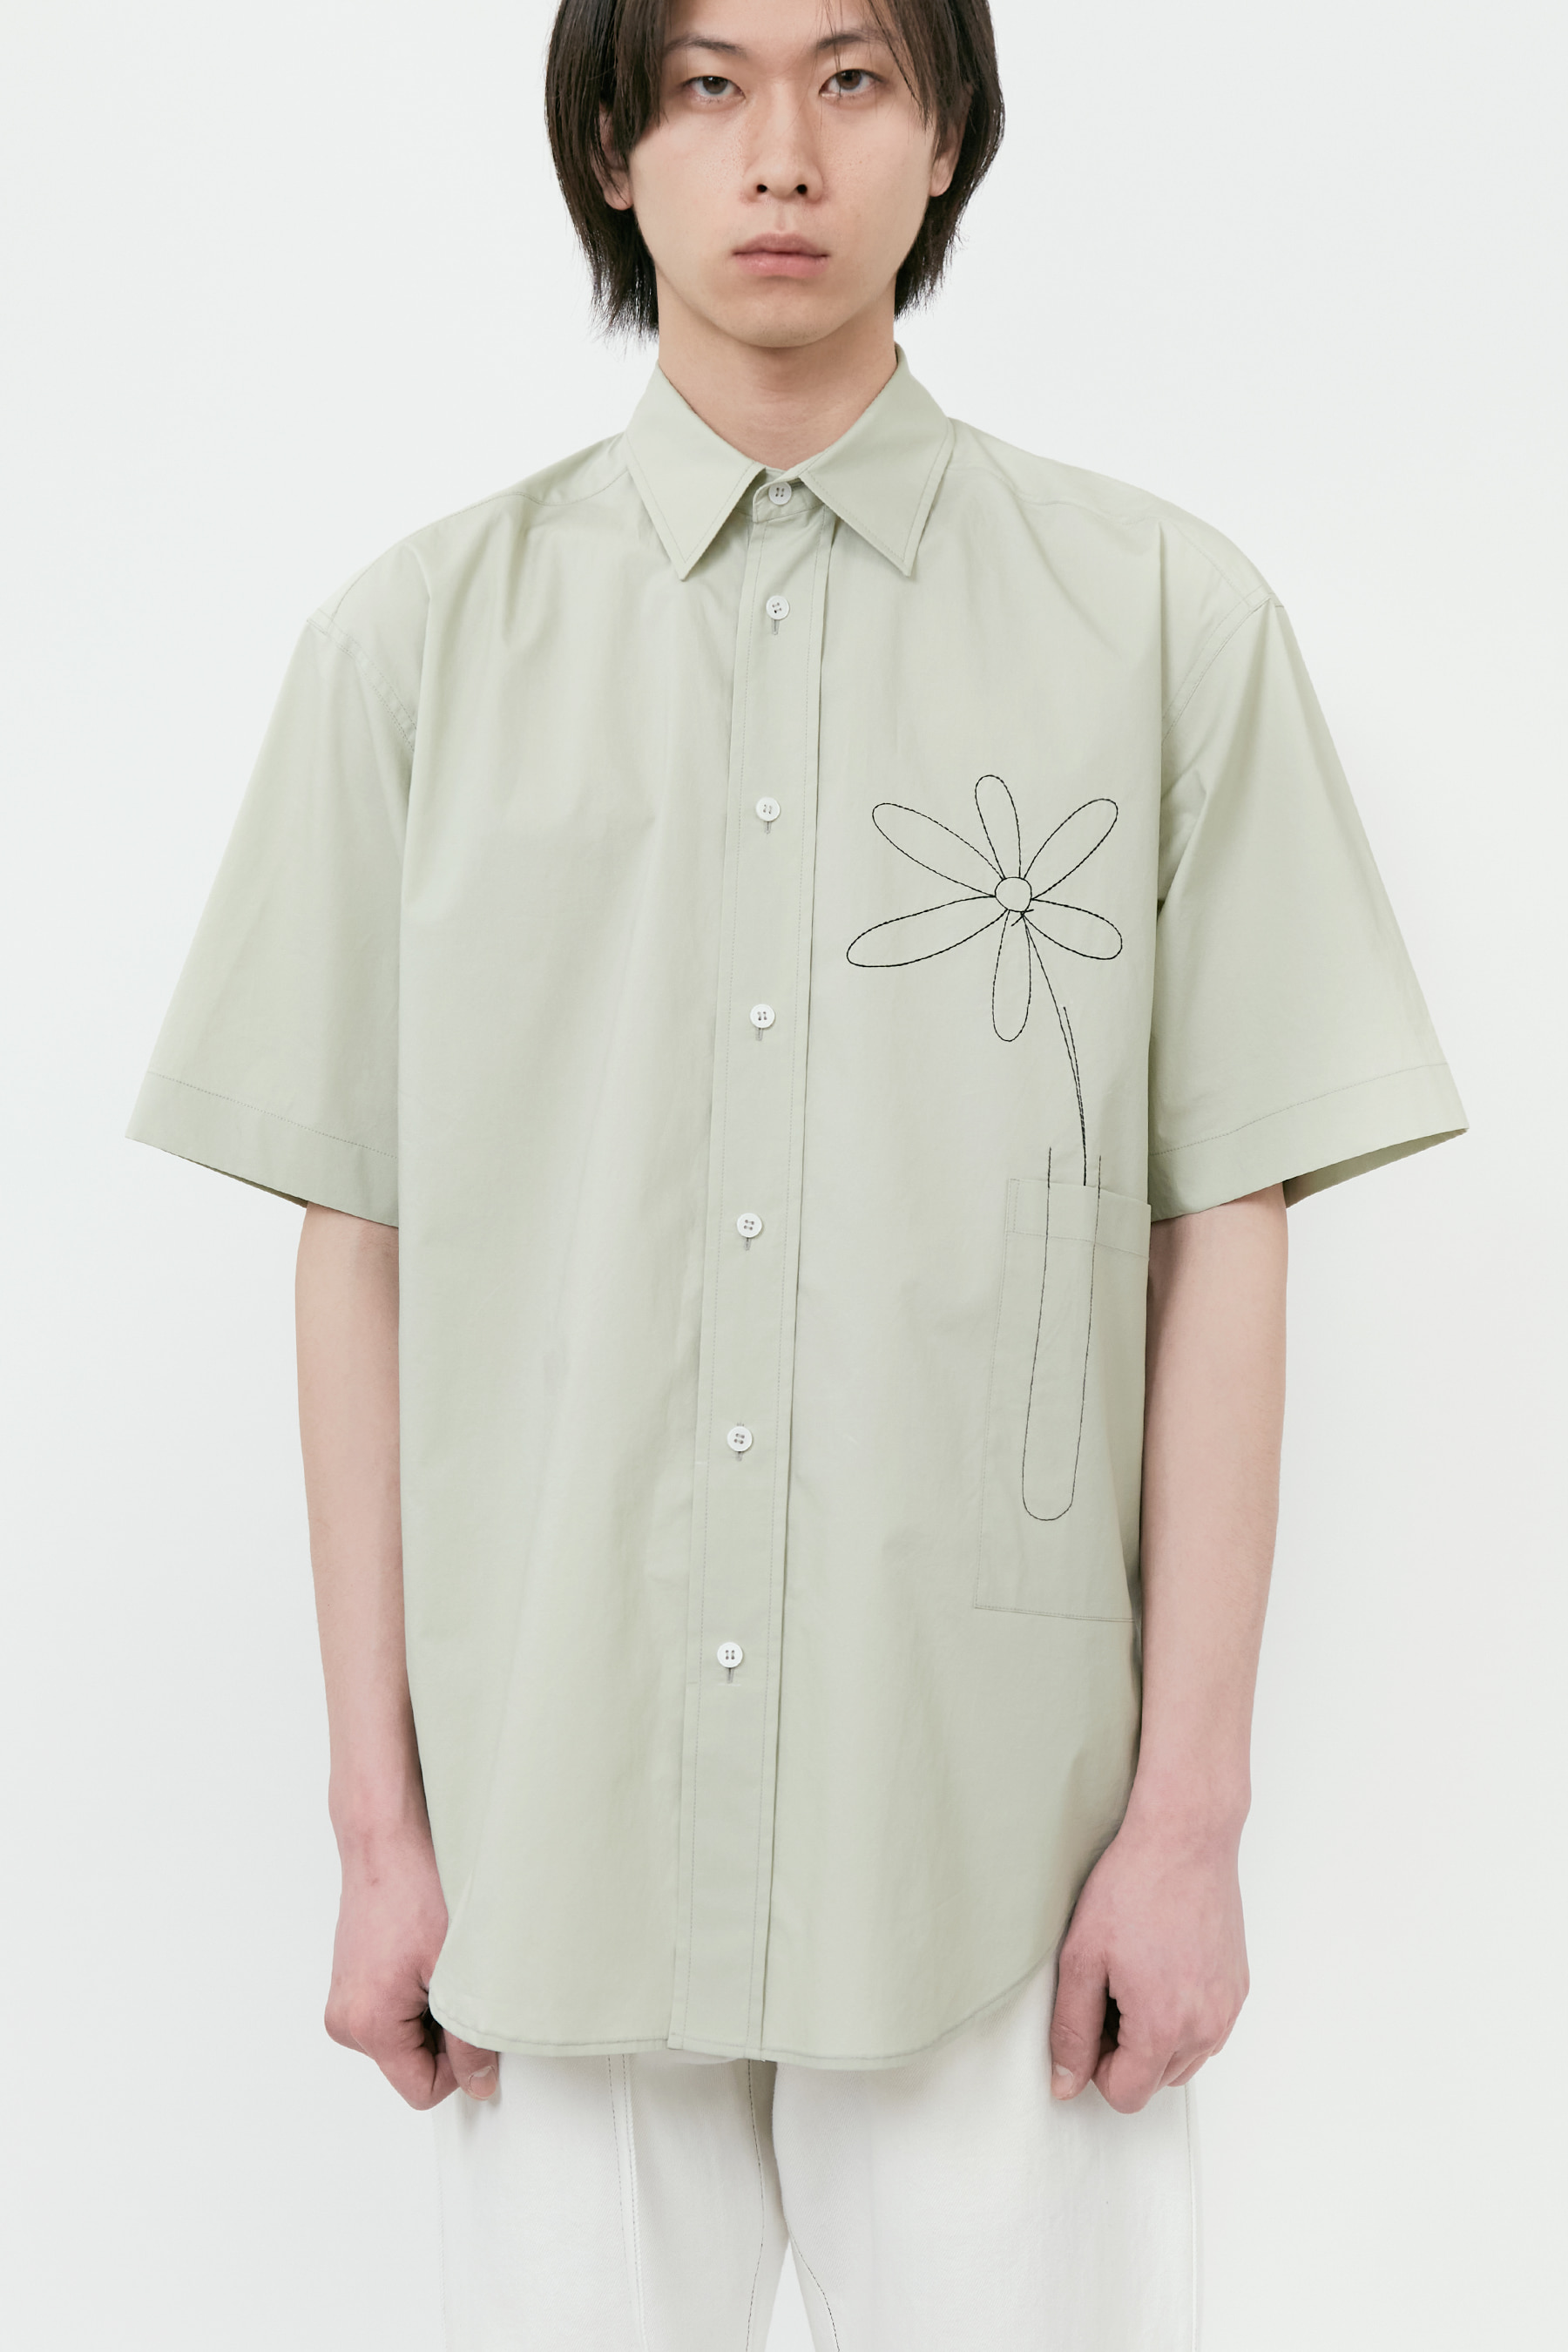 OLIVE FLOWER EMBROIDERY HALF SLEEVE SHIRTS